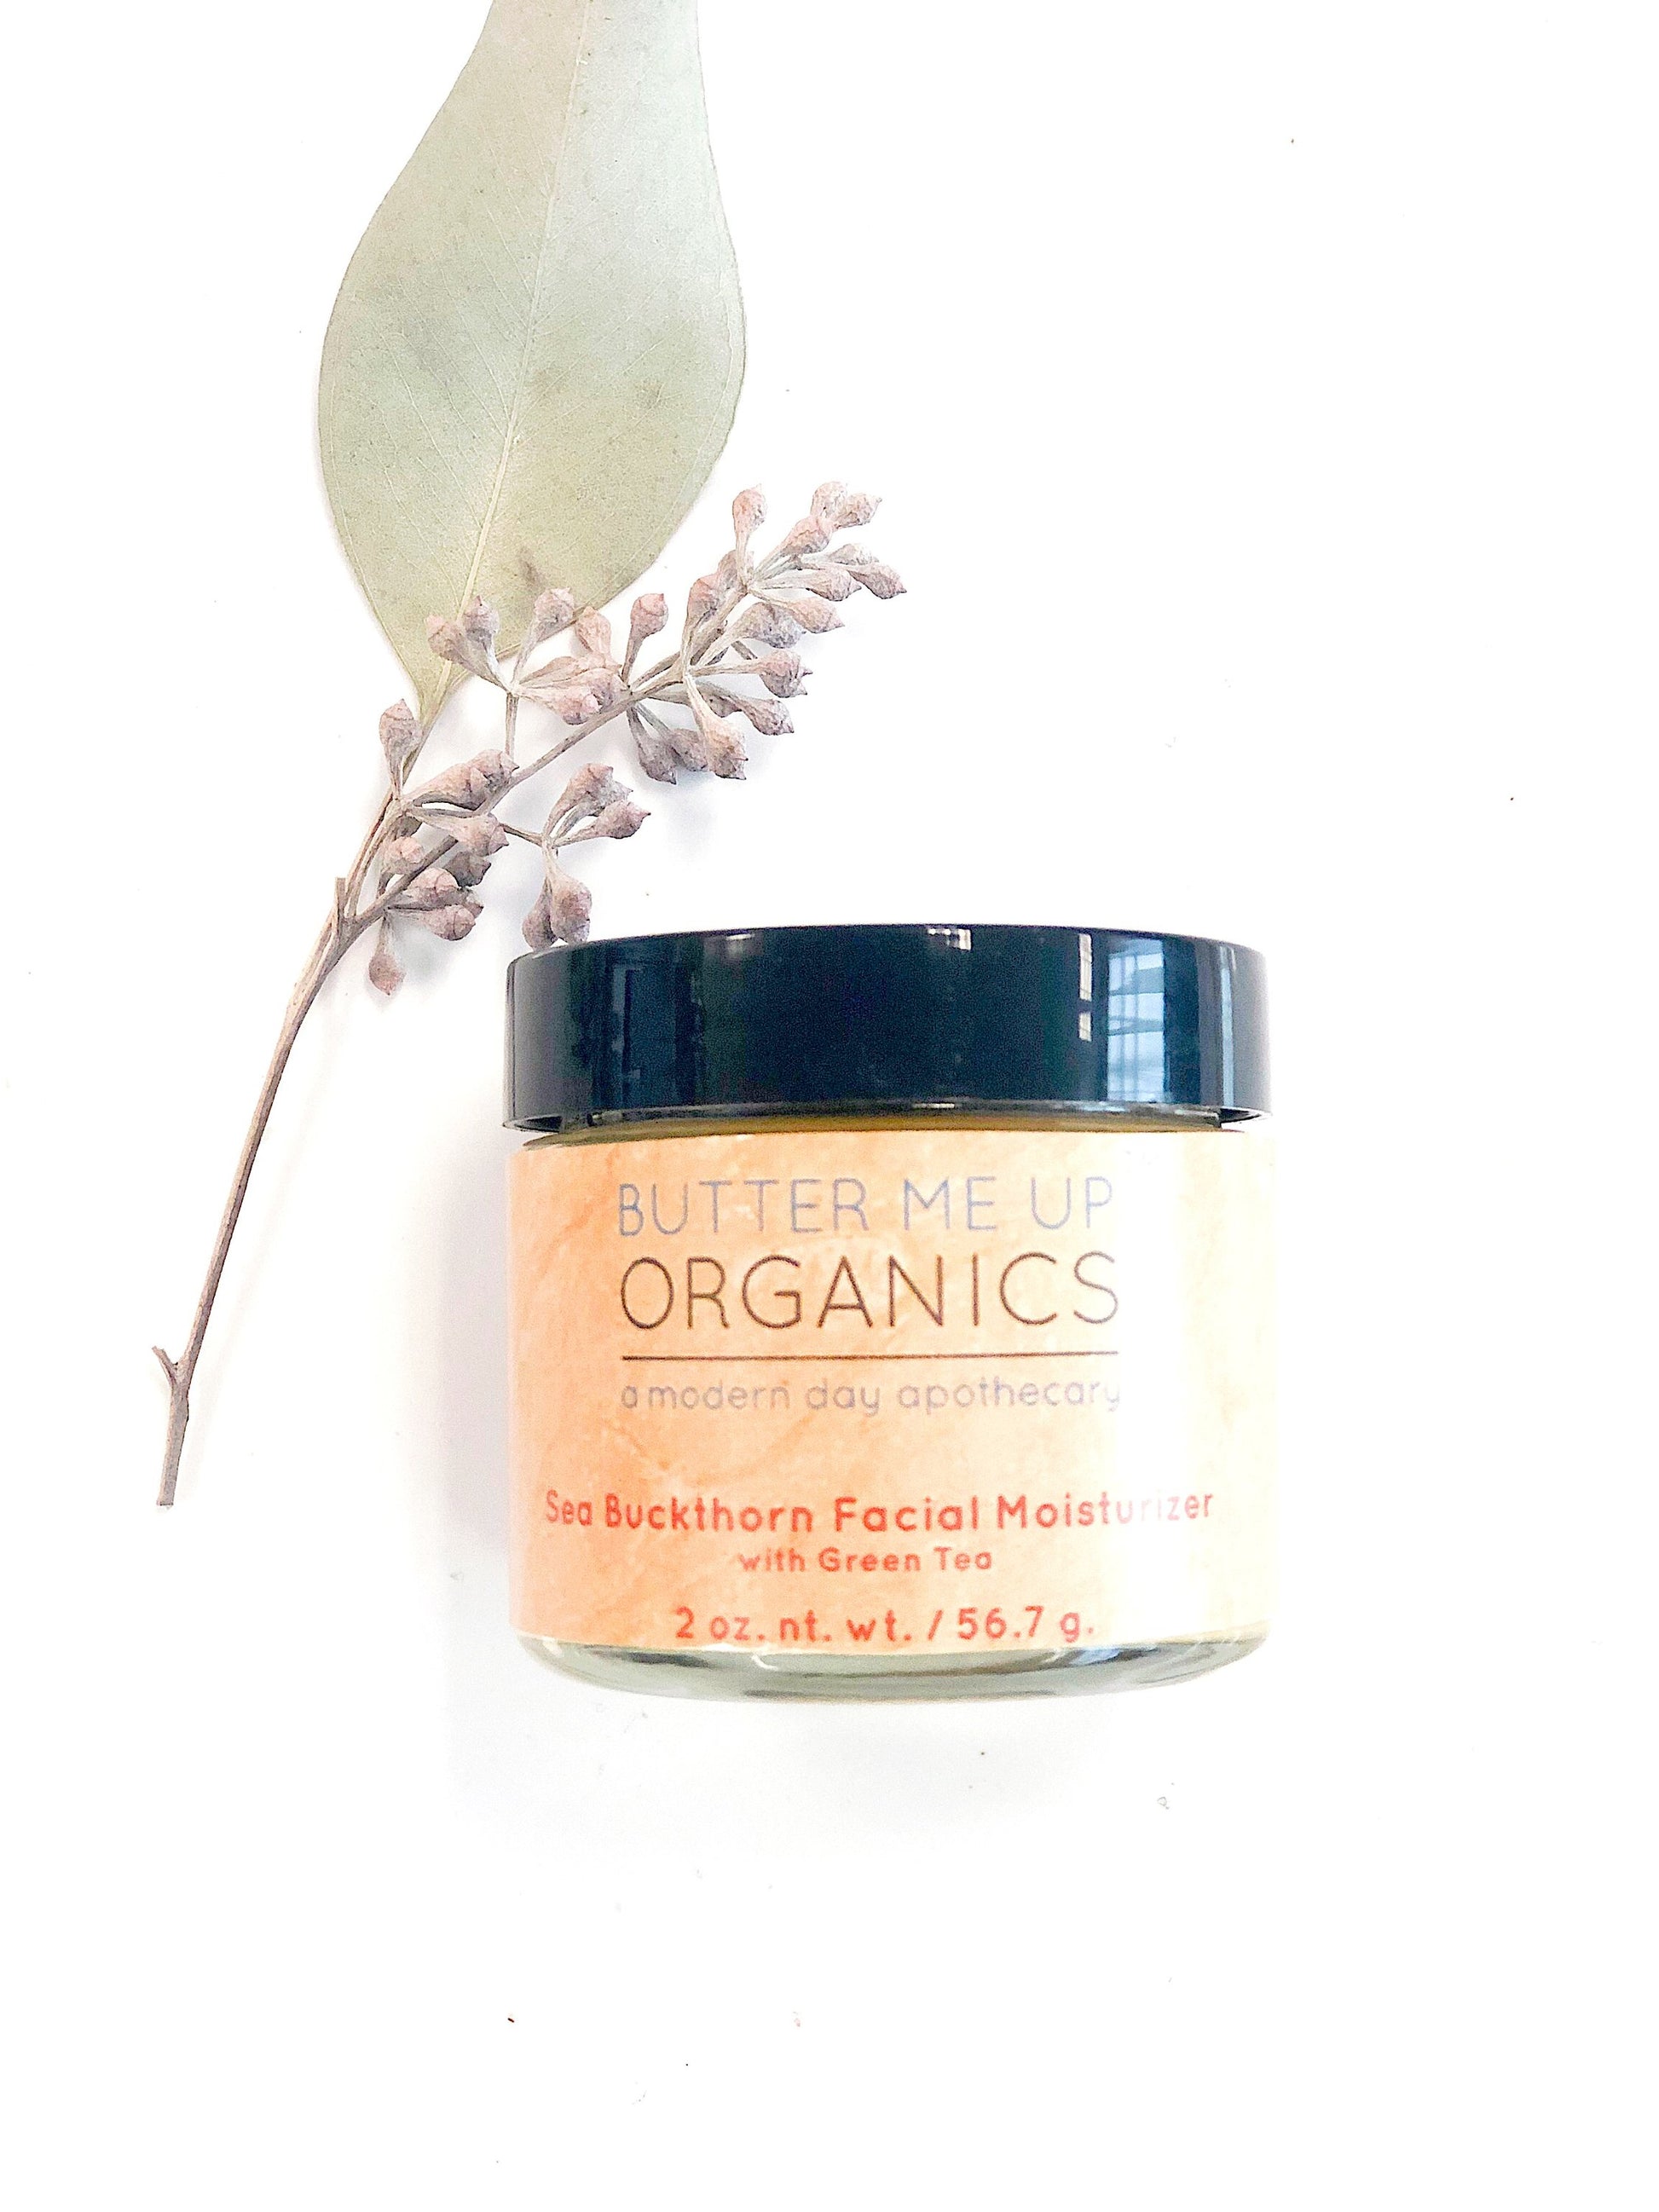 A jar of White Smokey Sea Buckthorn Facial Moisturizer with a leaf next to it.